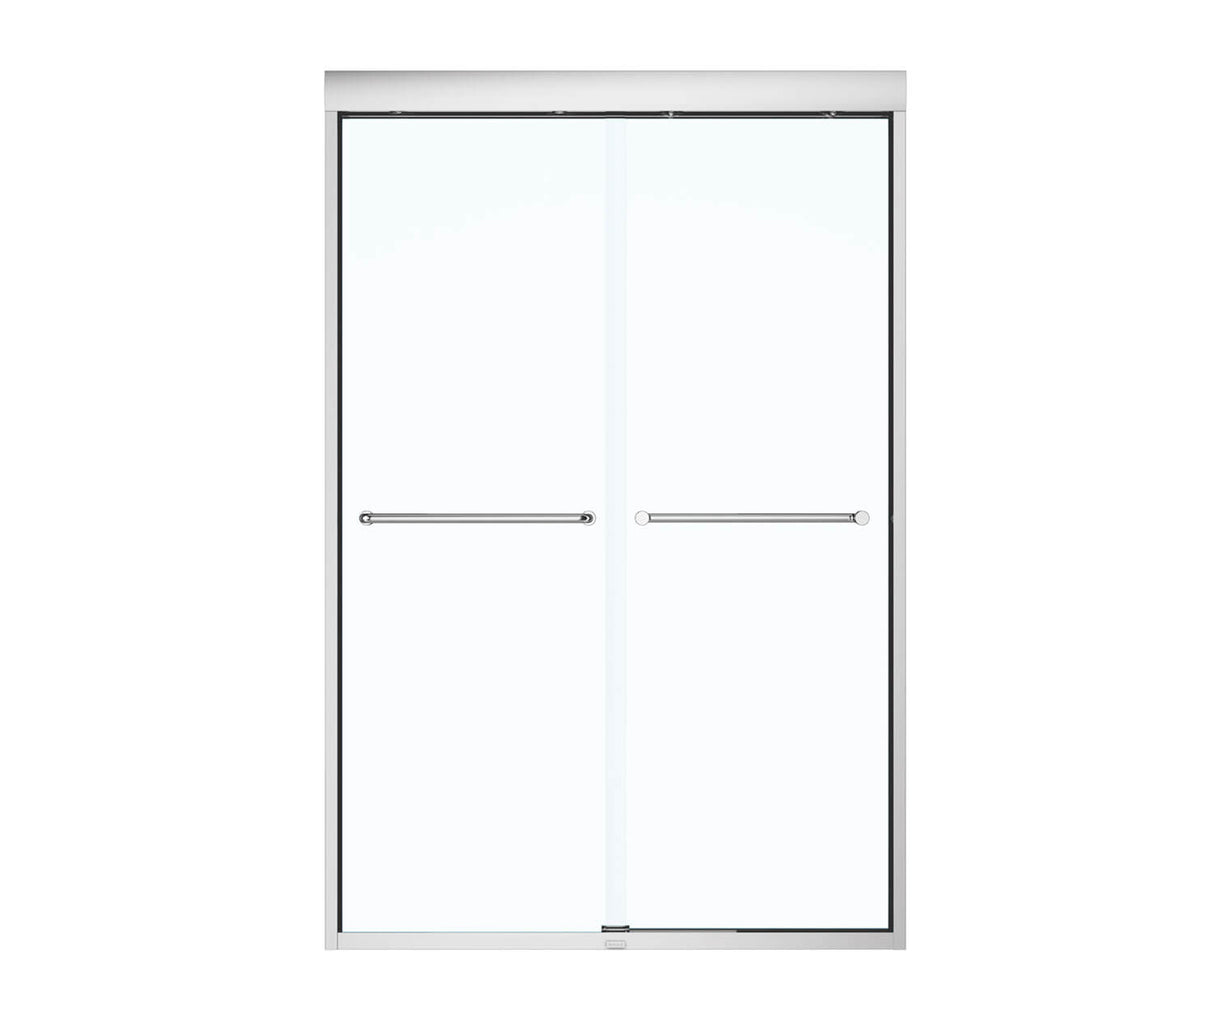 MAAX 135663-900-084-000 Aura 43-47 x 71 in. 6 mm Bypass Shower Door for Alcove Installation with Clear glass in Chrome